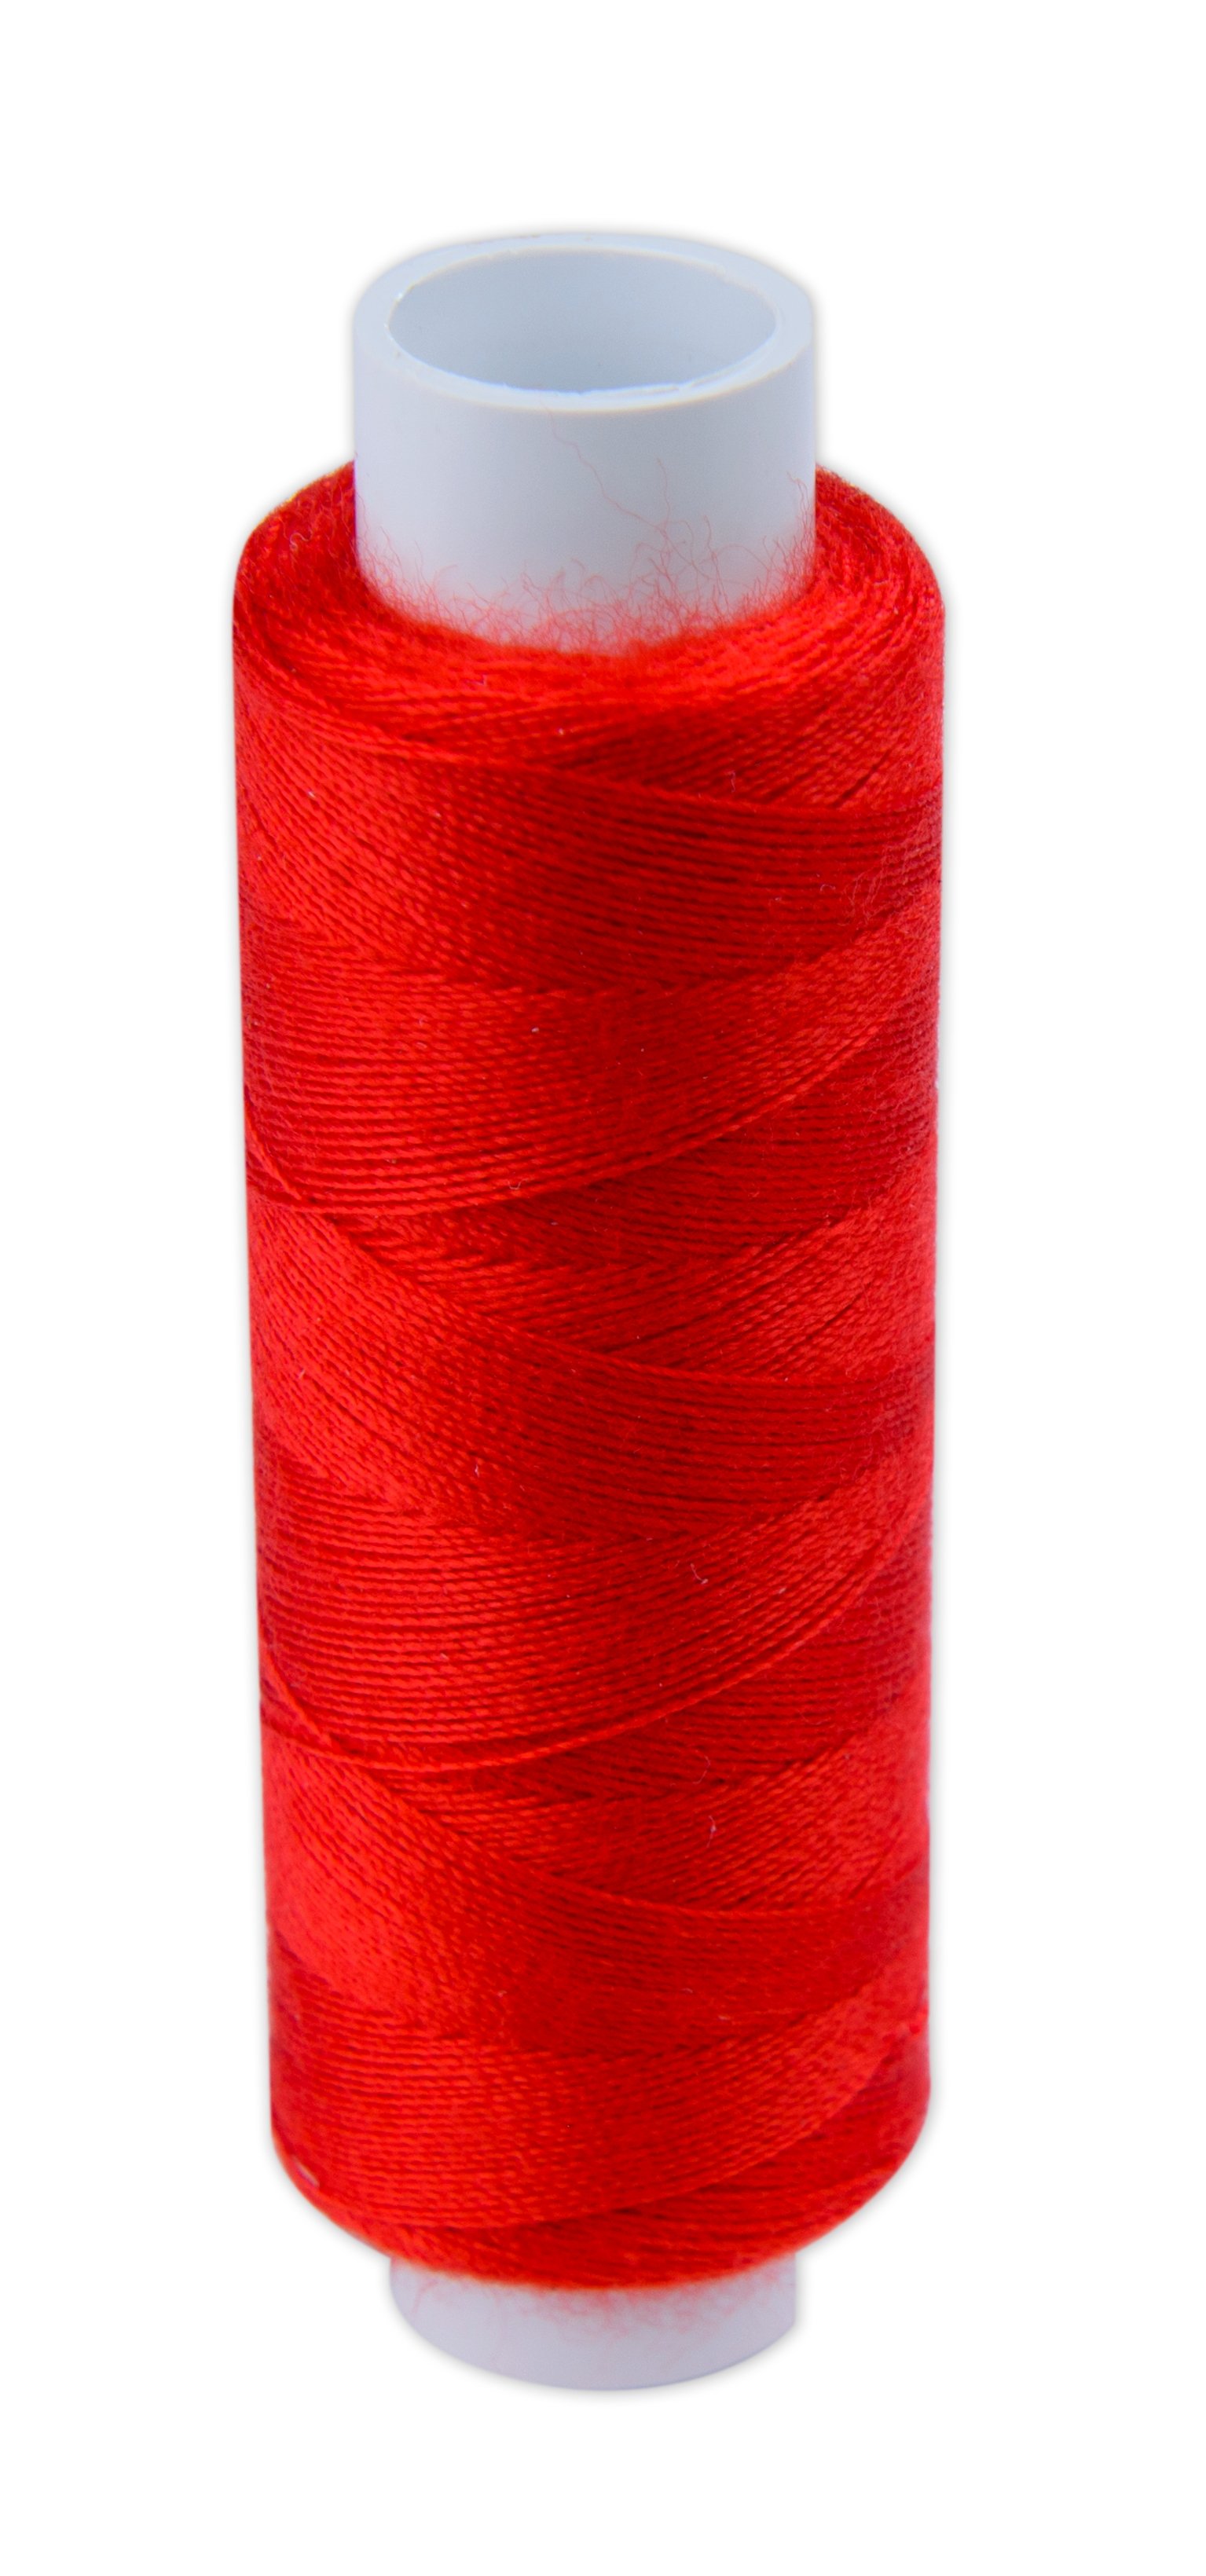 Polyester Sewing Thread, All Purpose Hand and Machine Sewing, 220yd Coil  Reel 